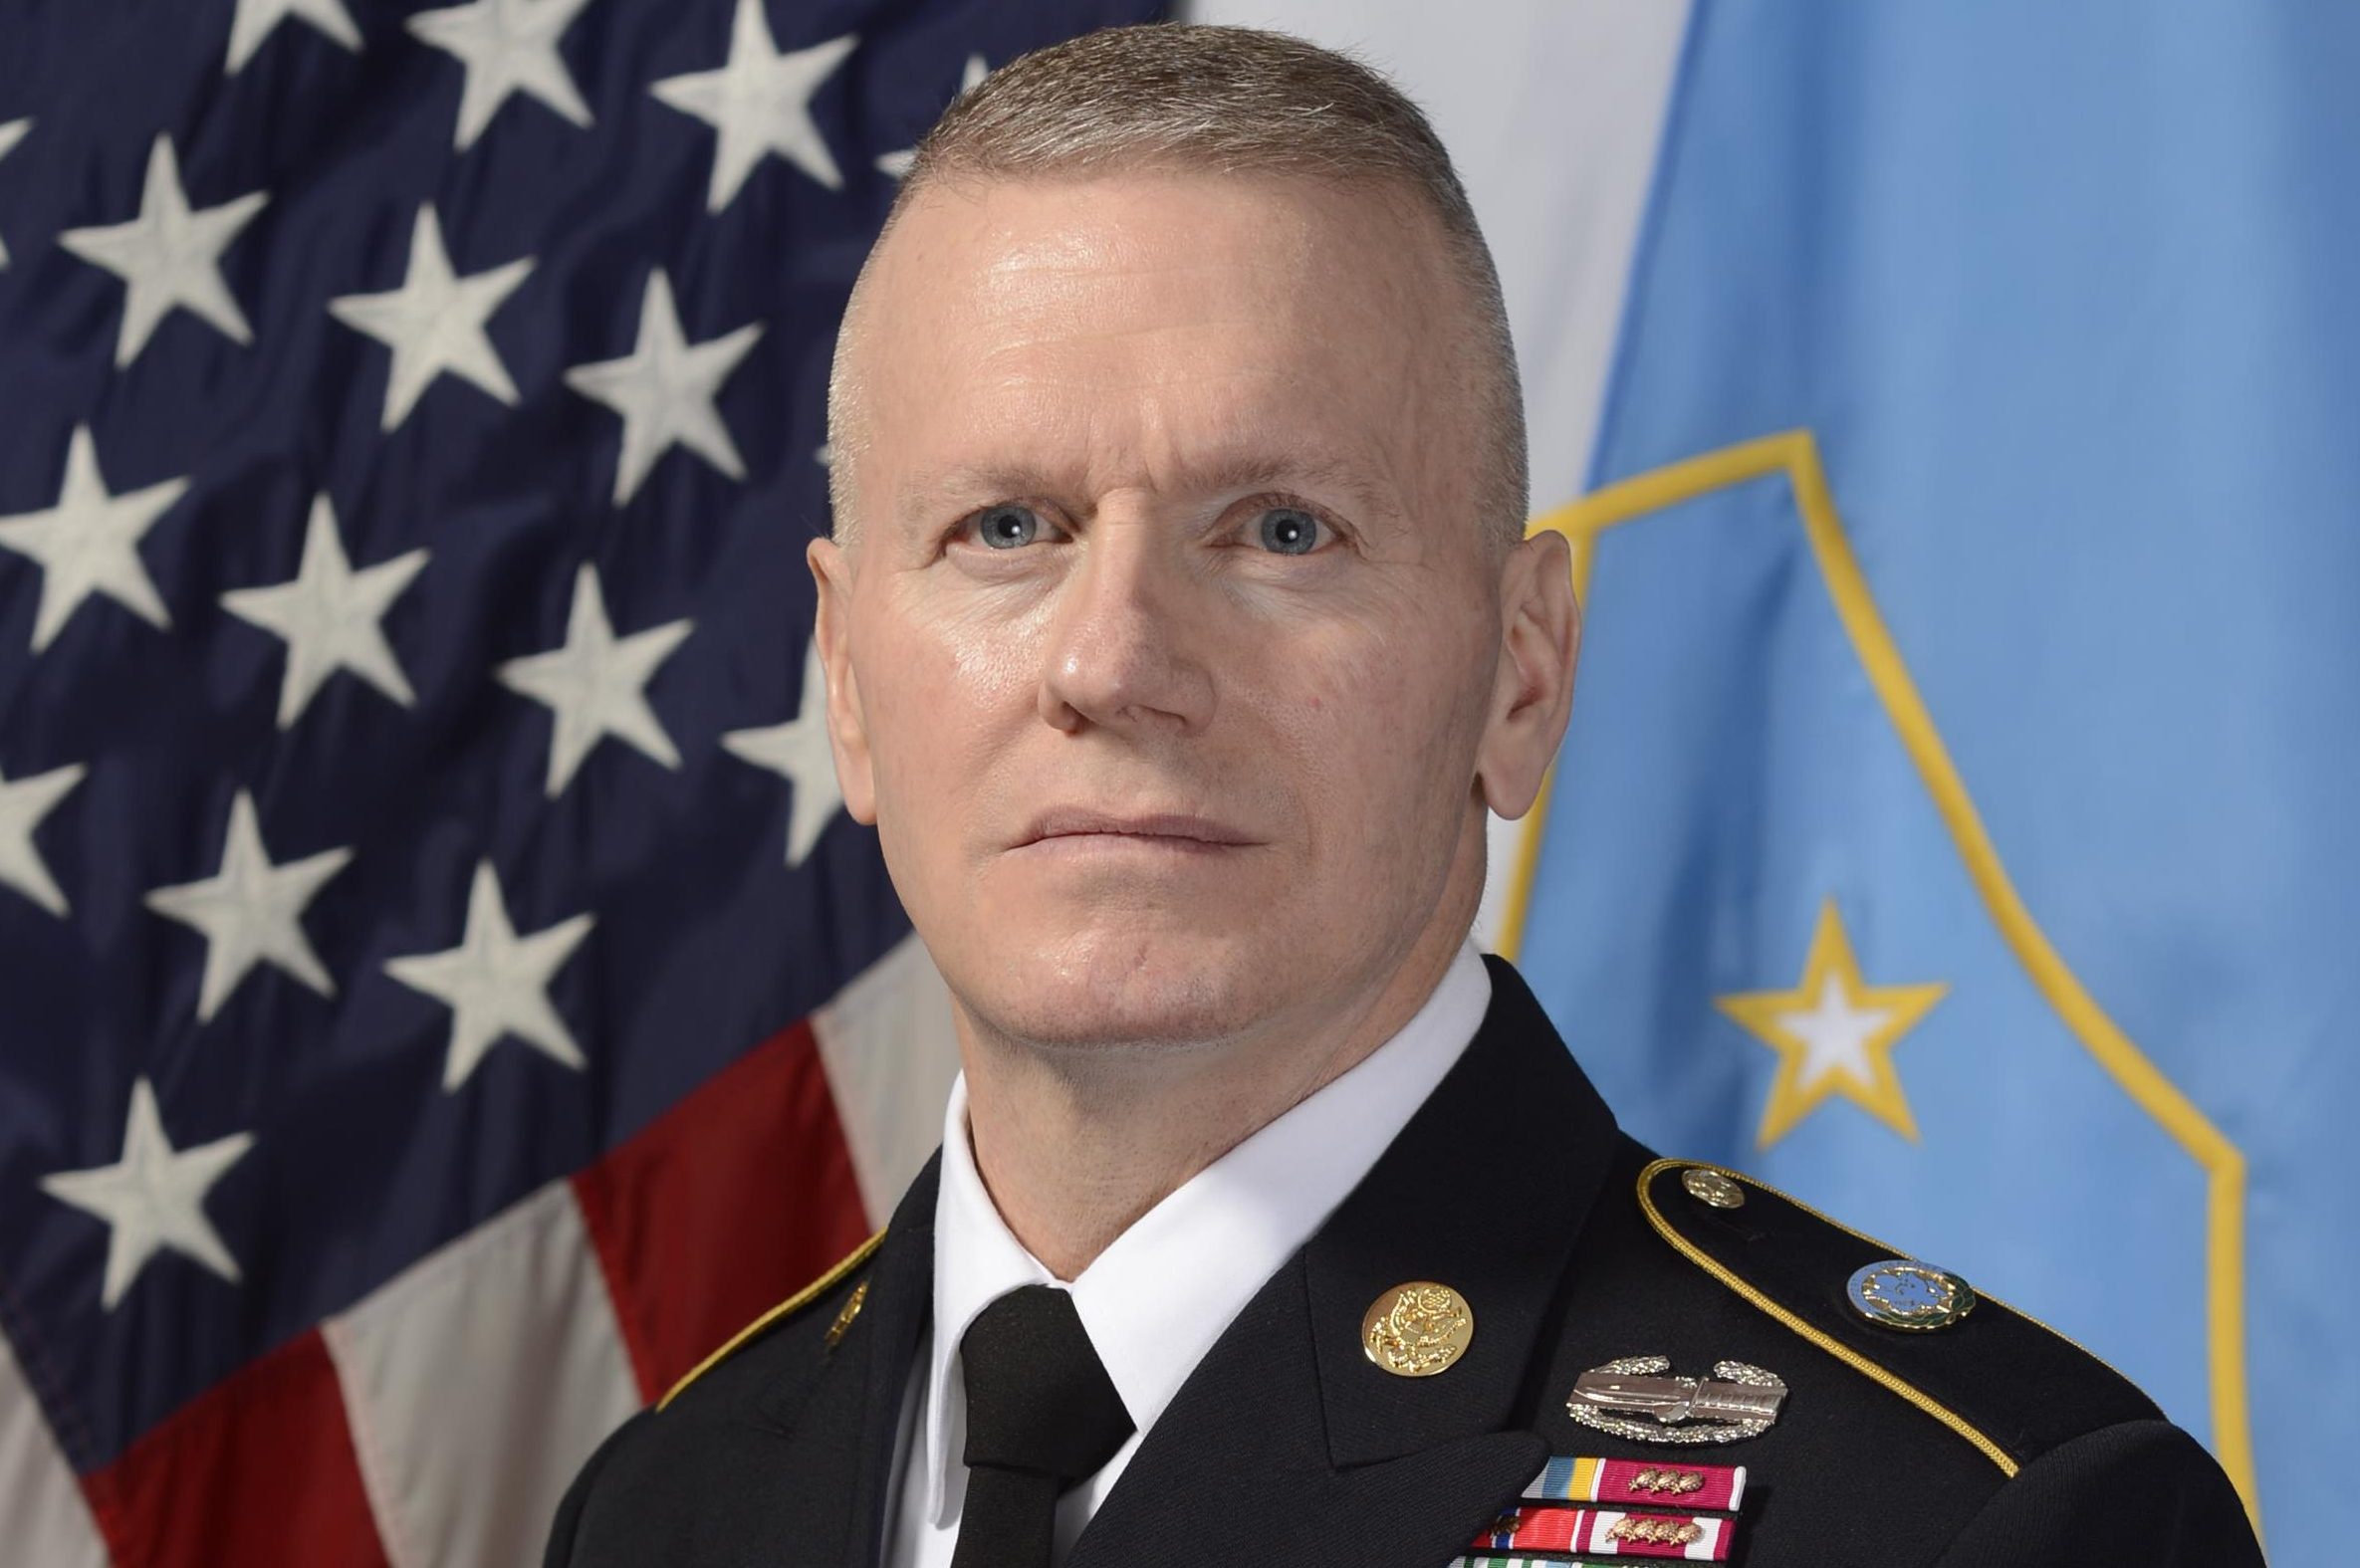 Readiness Crisis? What Crisis, Ask Top NCOs